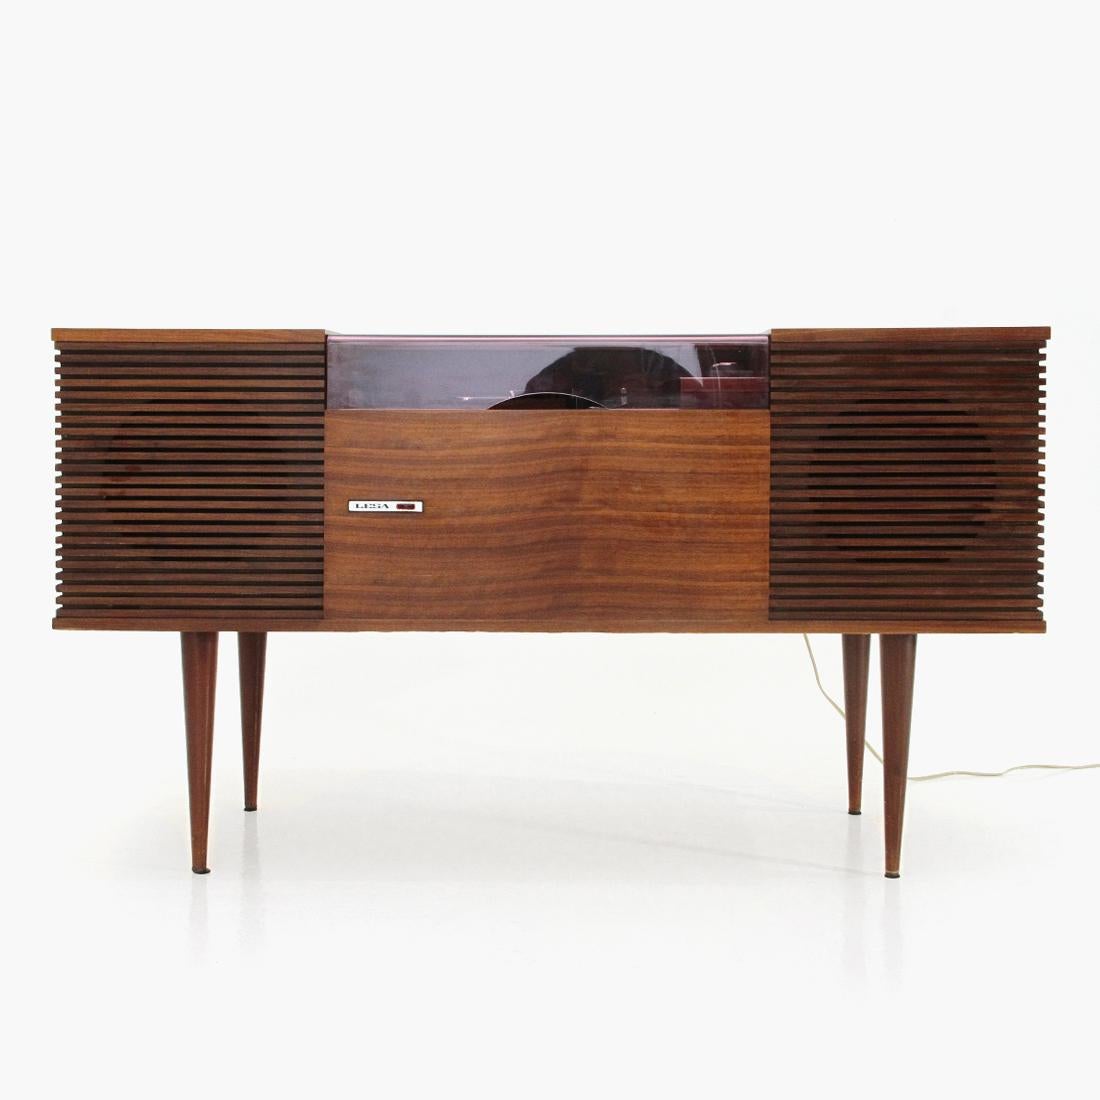 Stereo cabinet of Italian manufacture produced in the 1960s by Lesa.
The Lavorazioni Elettromeccaniche Società Anonima (LESA),
under careful guidance it soon became the only Italian company capable of producing high quality turntables.
Structure